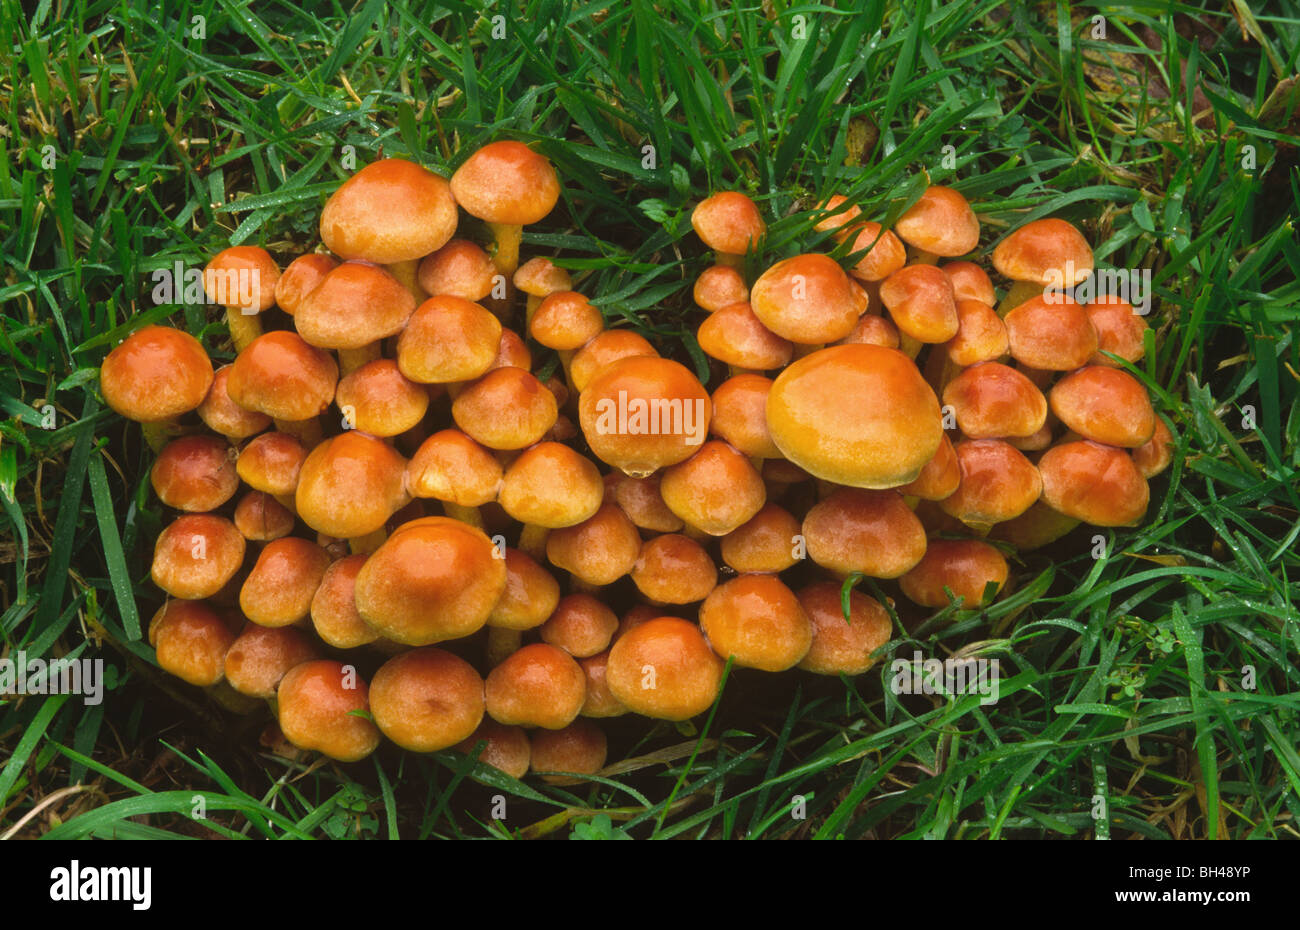 Brick caps (Hypholoma sublateritium)in grassy verge. Brick coloured young fungus growing in mass amongst grass. Stock Photo